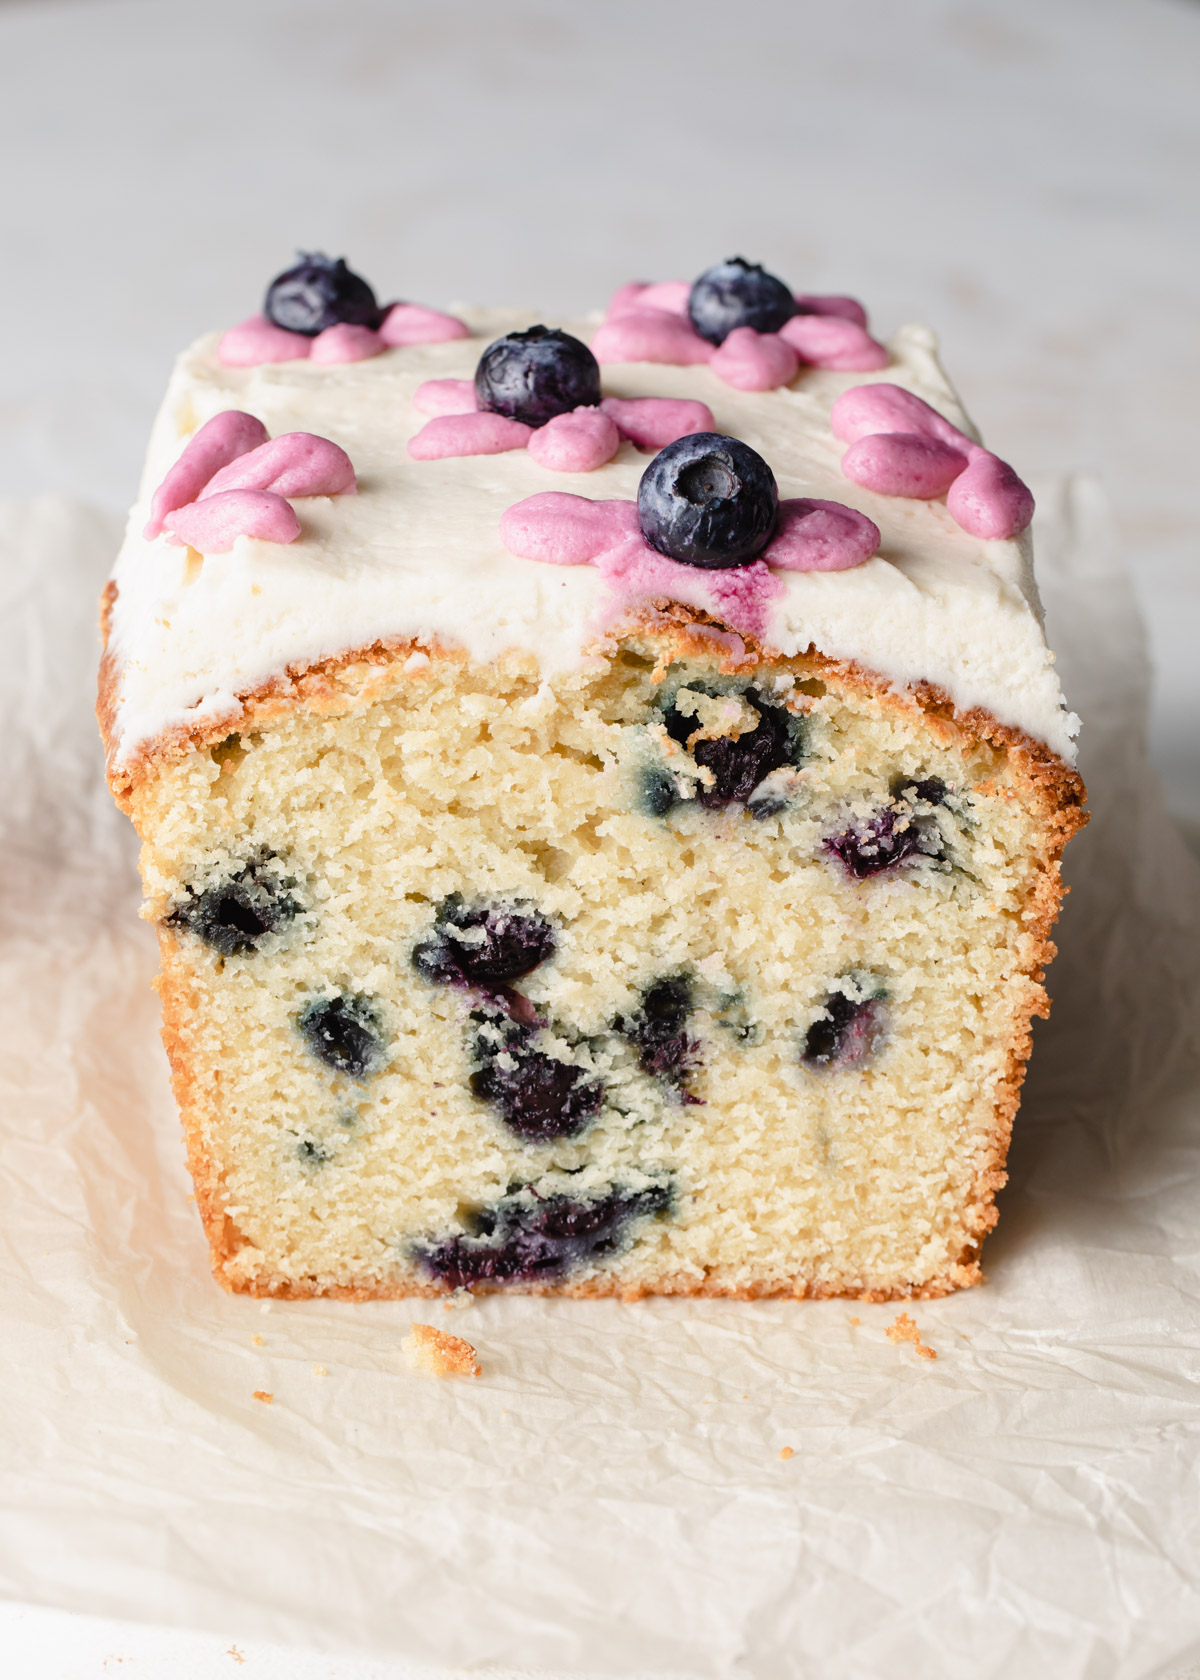 A close-up of a cross-section blueberry pound cake